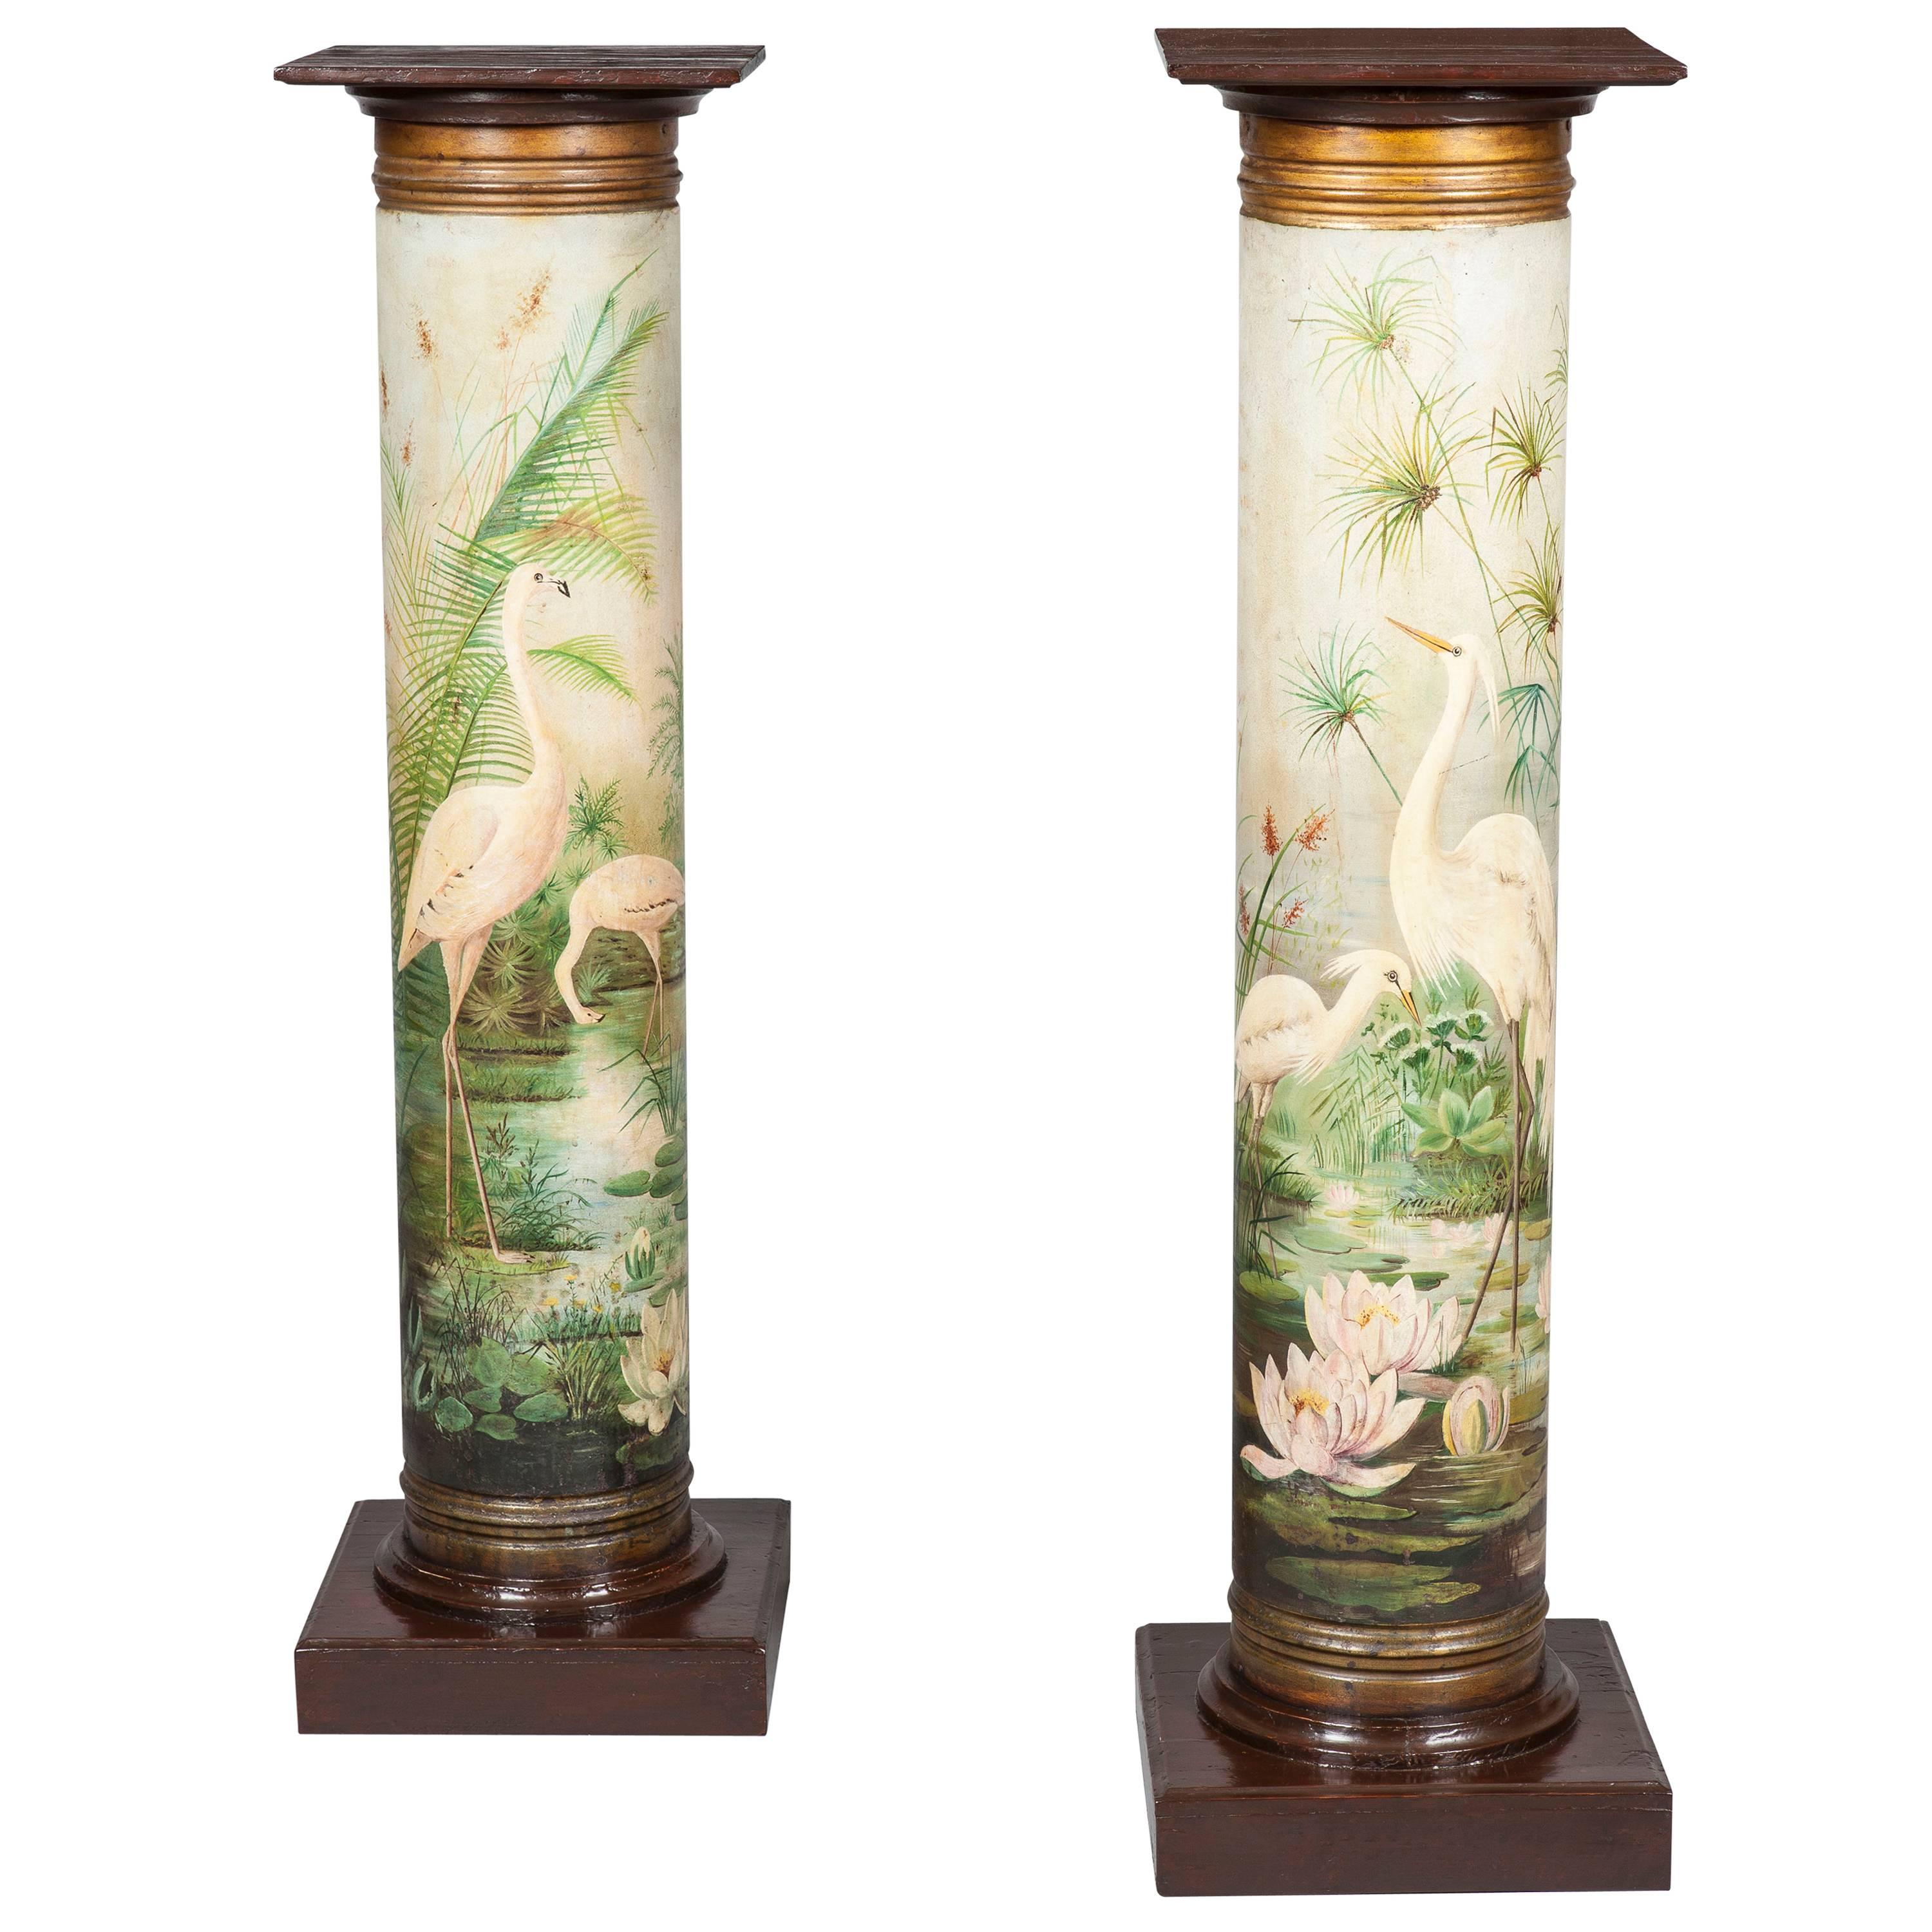 Pair of French 19th Century Painted Pedestals with Lakeland Landscape Scene